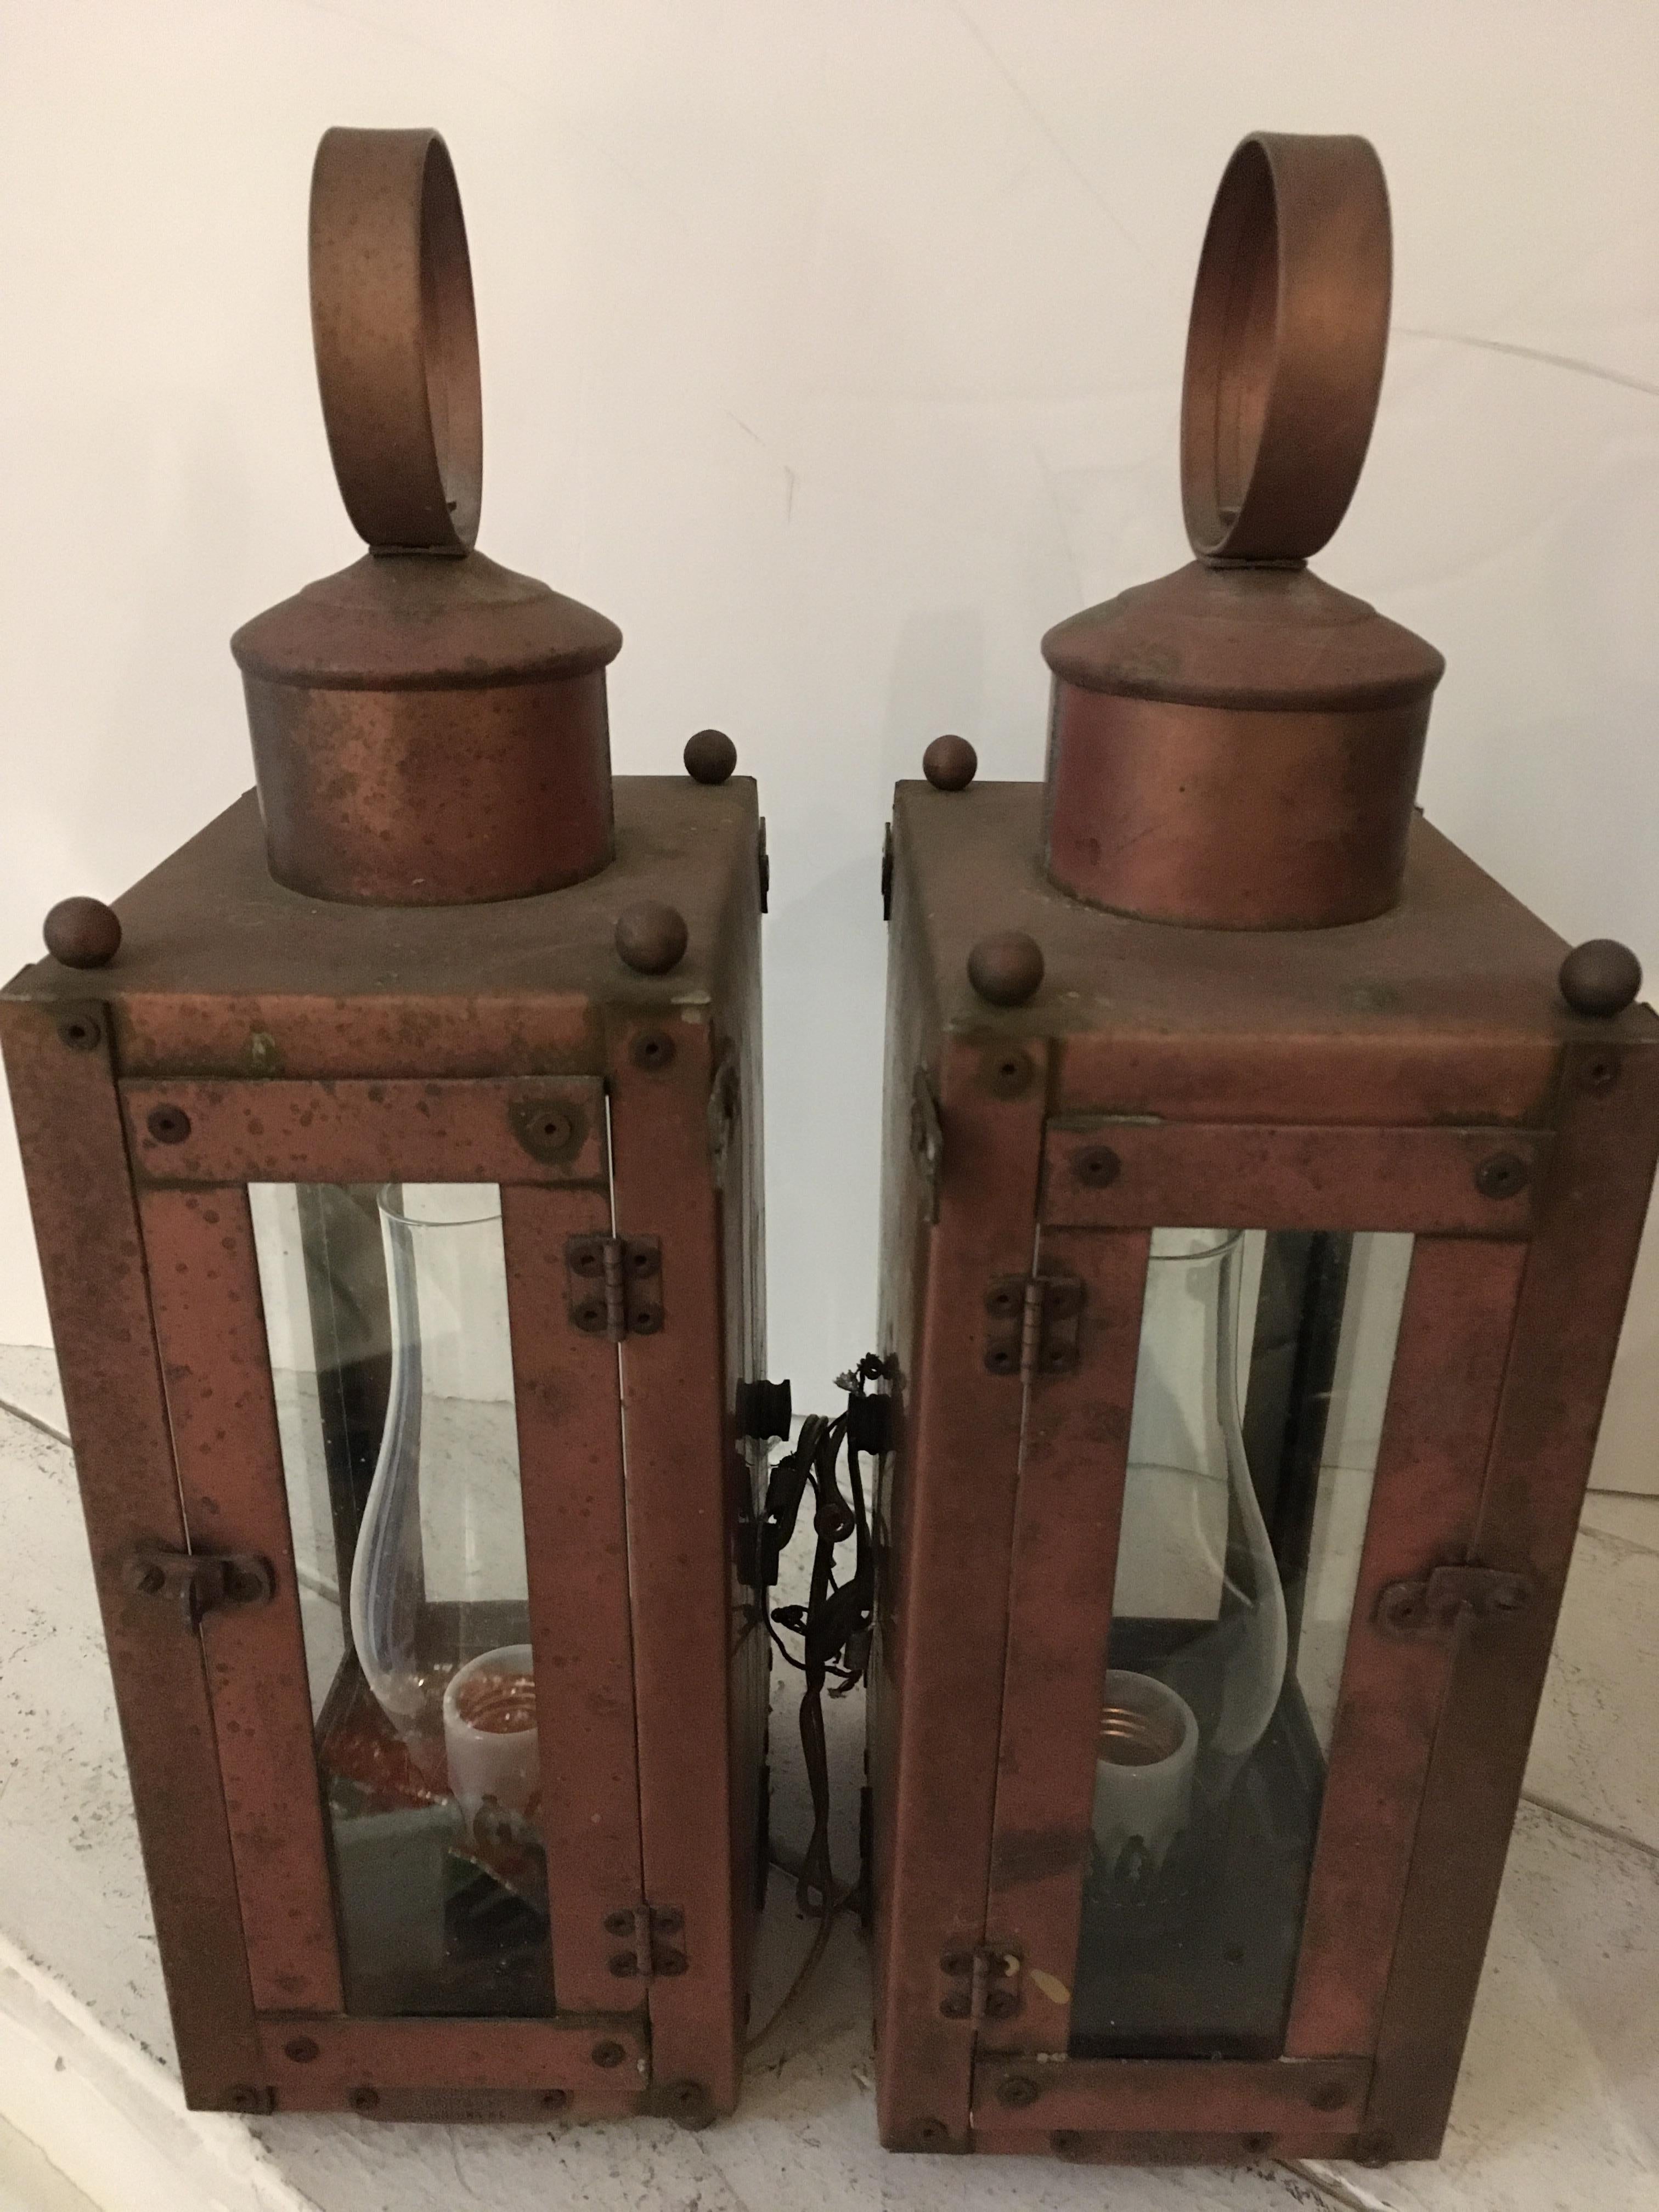 Handcrafted by Hollis Fisher, lamplighter corner, Martha's Vineyard, a handsome trio of brass and copper exterior lantern sconces.
2 square lanterns are 16 tall x 6.25 wide x 4.75 deep
the other one is 16 x 8 x 7.5 deep.